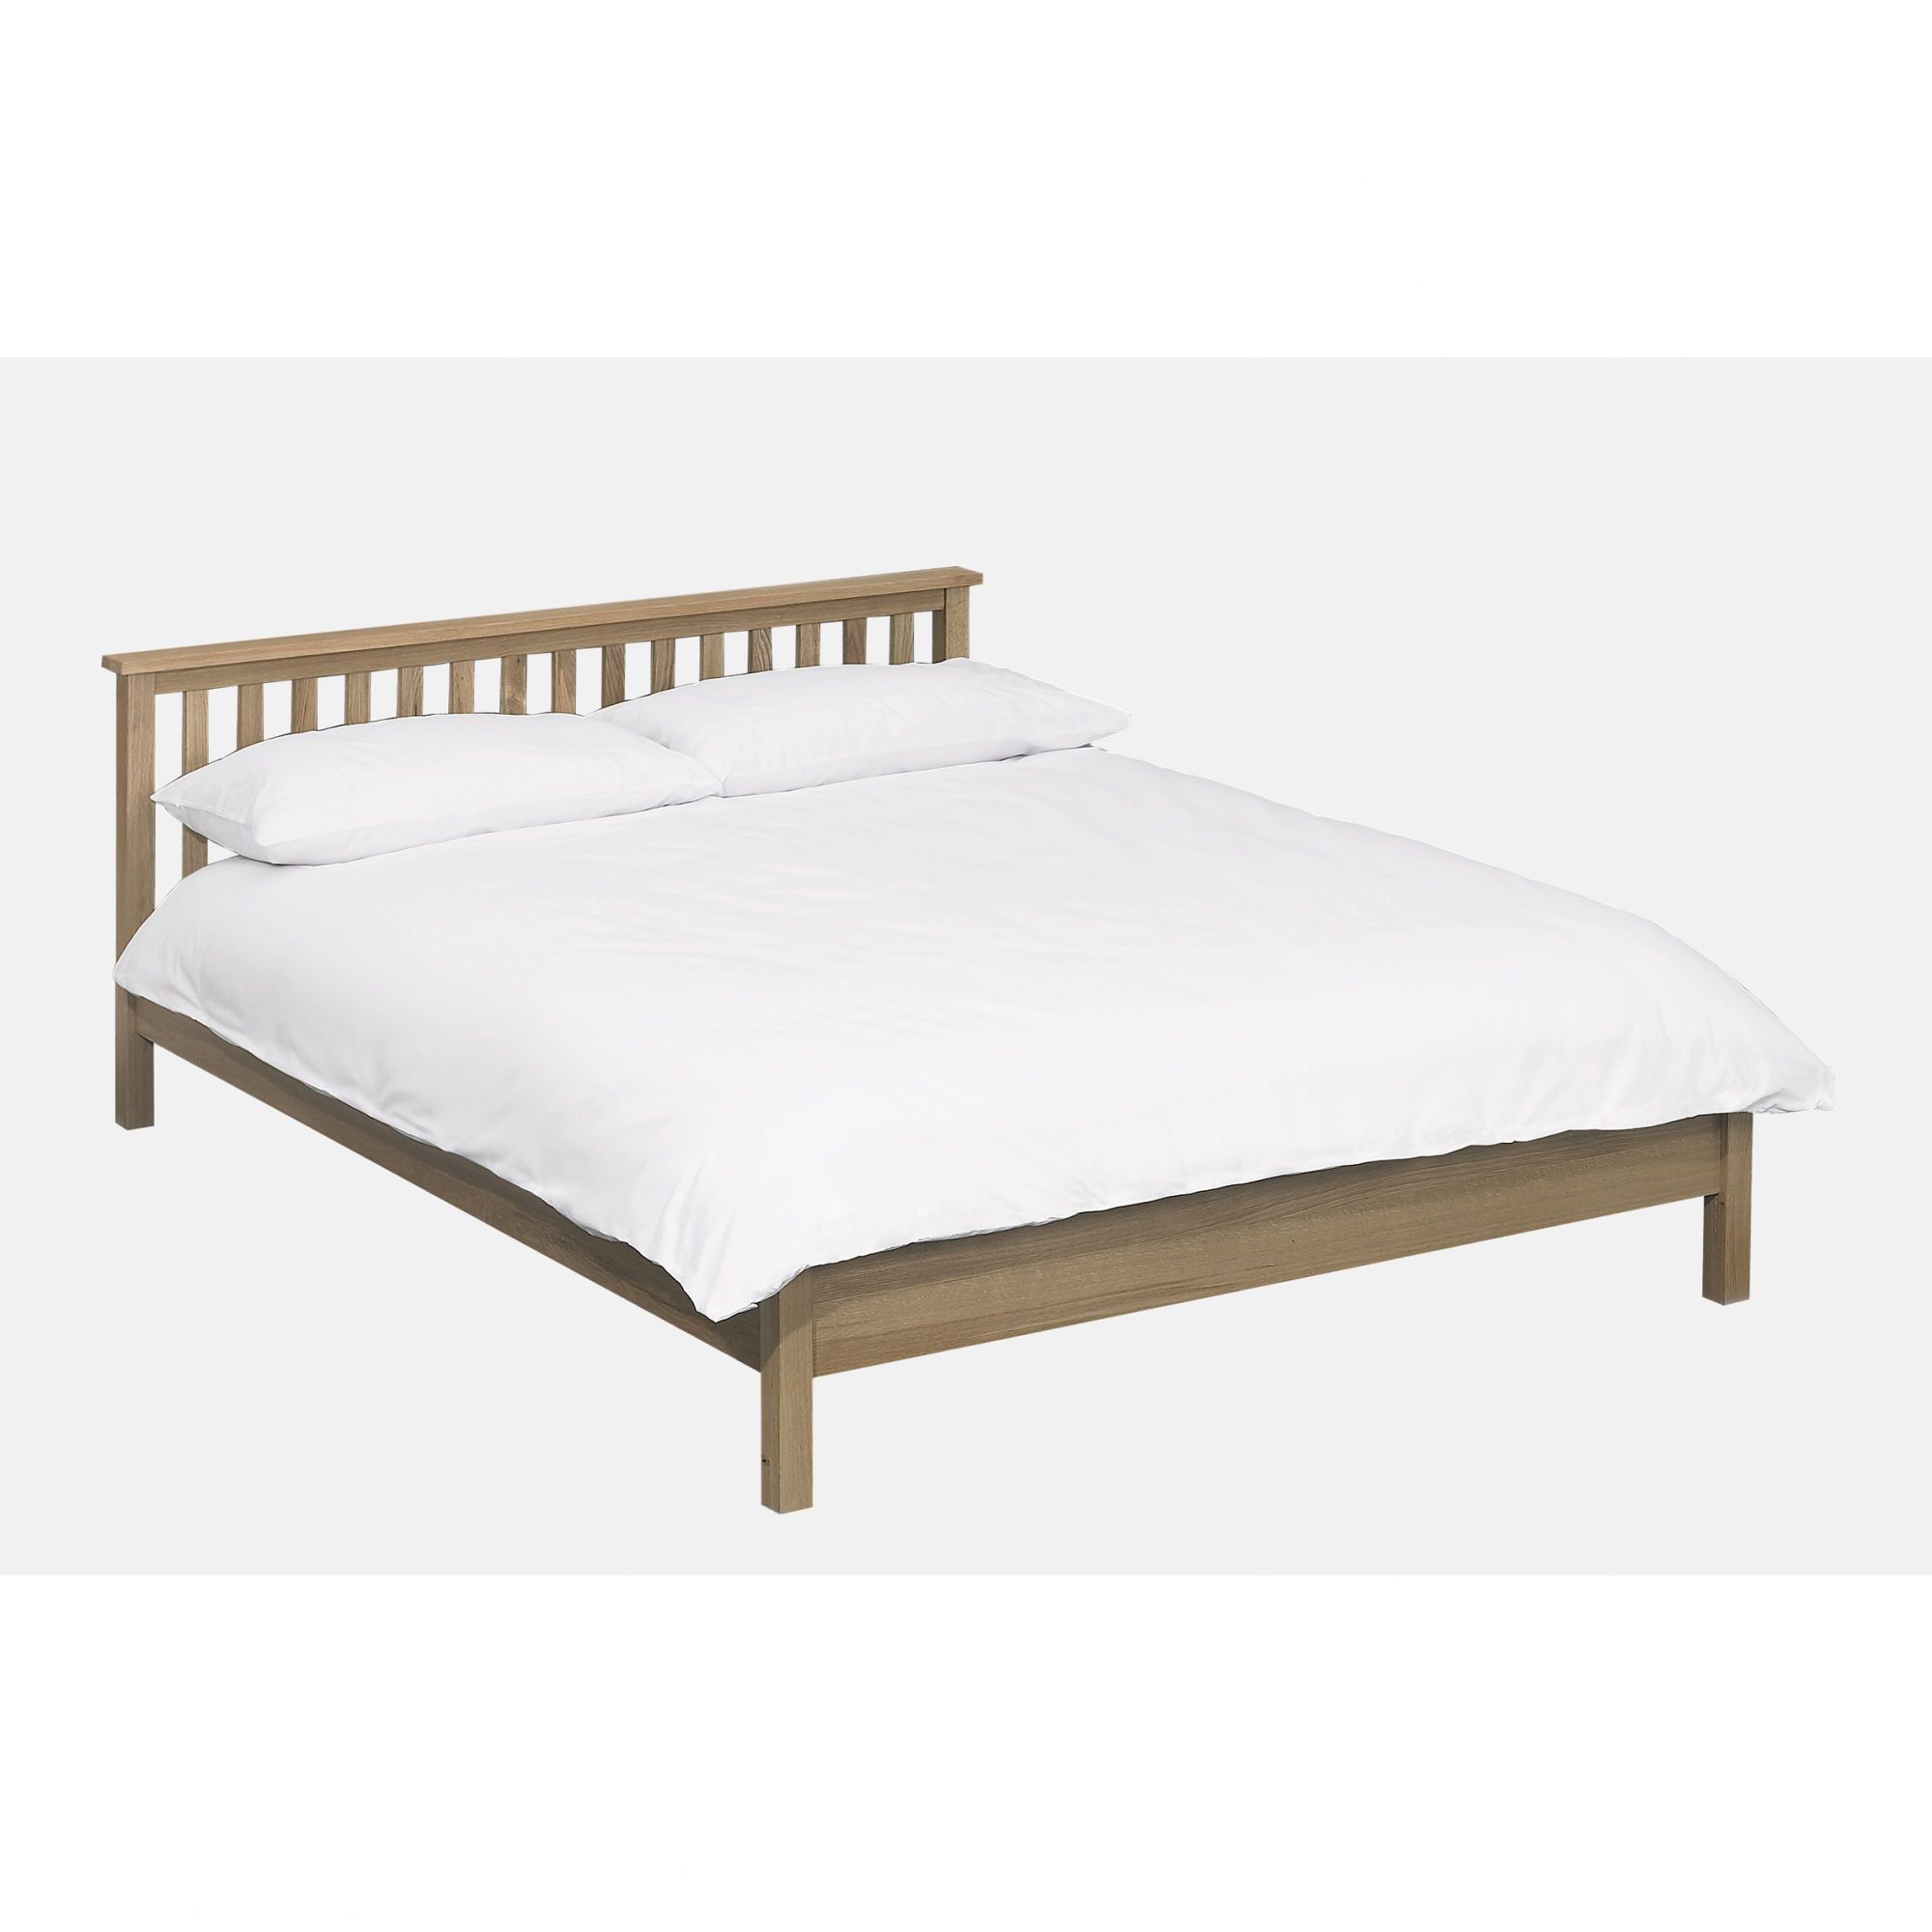 Home Zone Rosevalley Bed Frame - Double at Tesco Direct